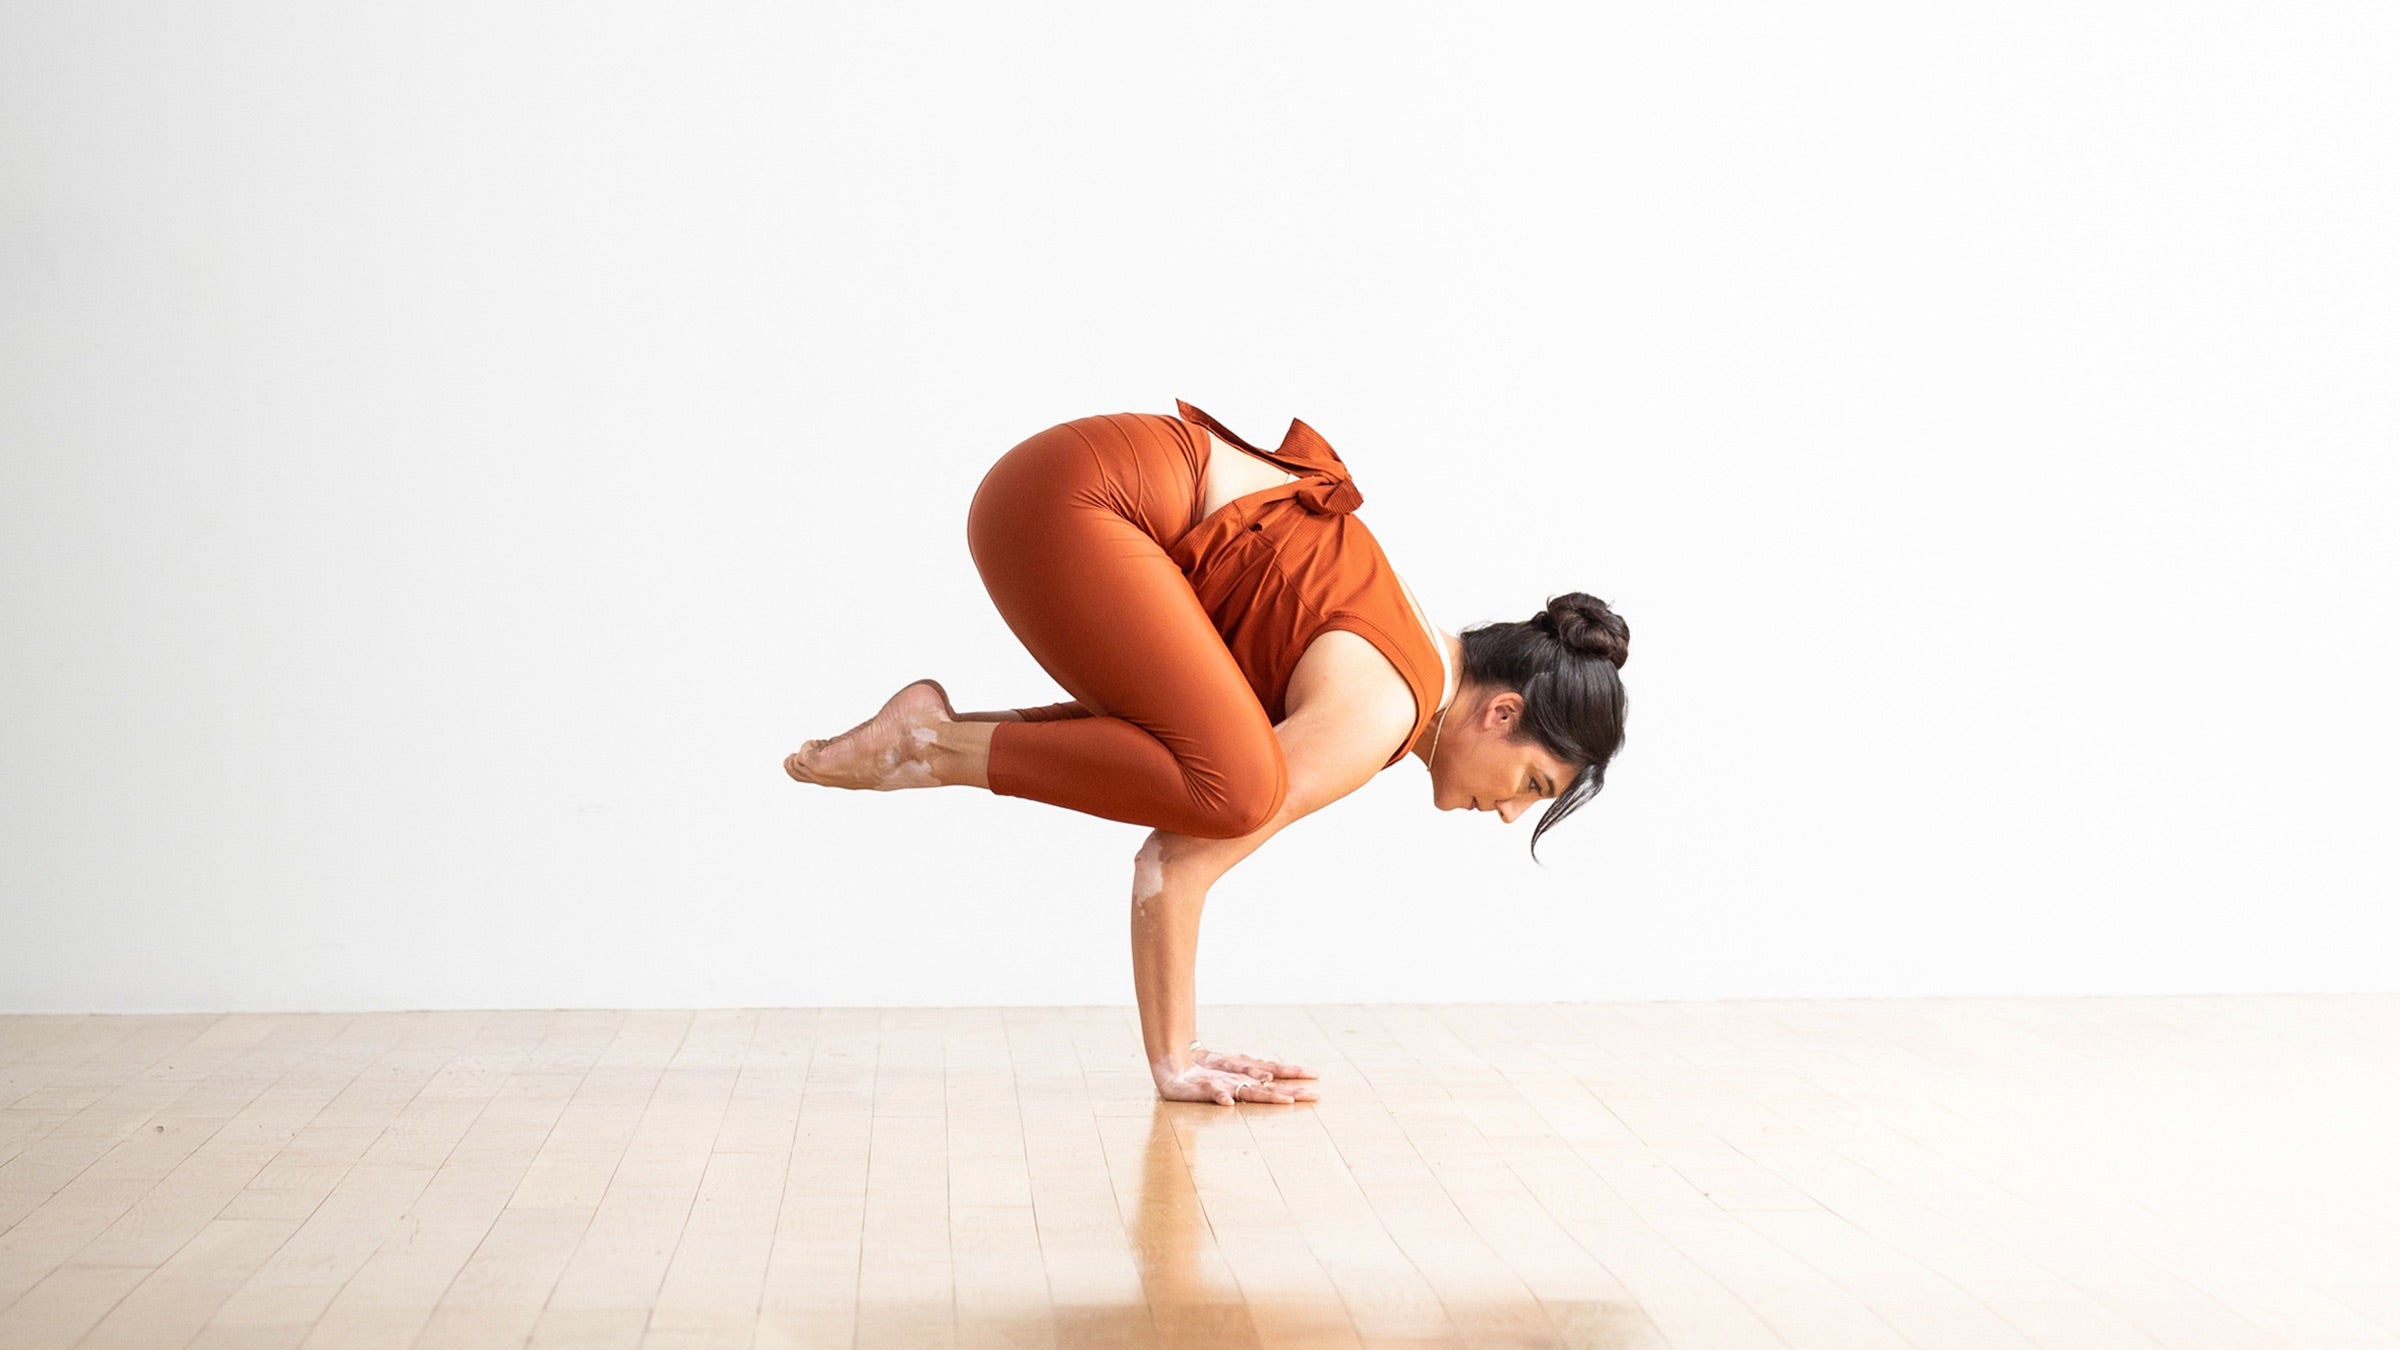 Yoga for weight loss Try crow pose to tone your arms and legs  HealthShots